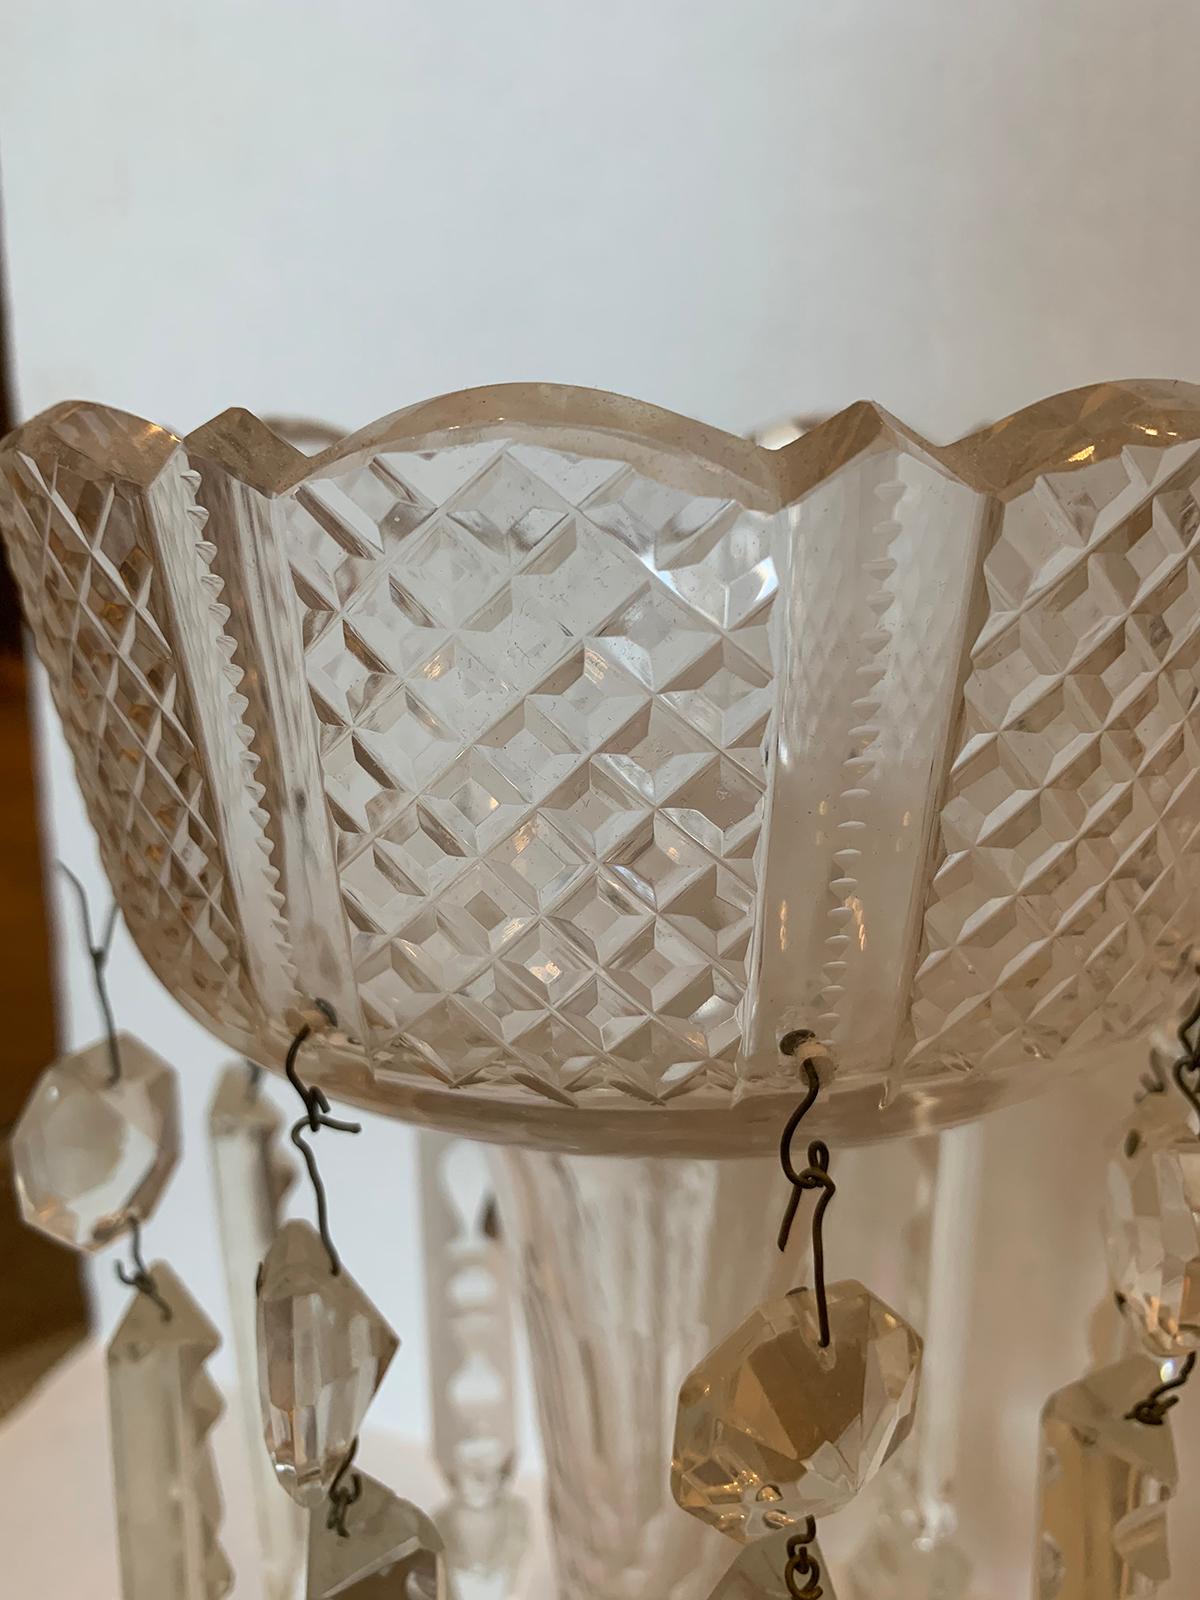 Pair of 19th Century American Clear Cut Crystal Mantel Lusters with Prisms 4